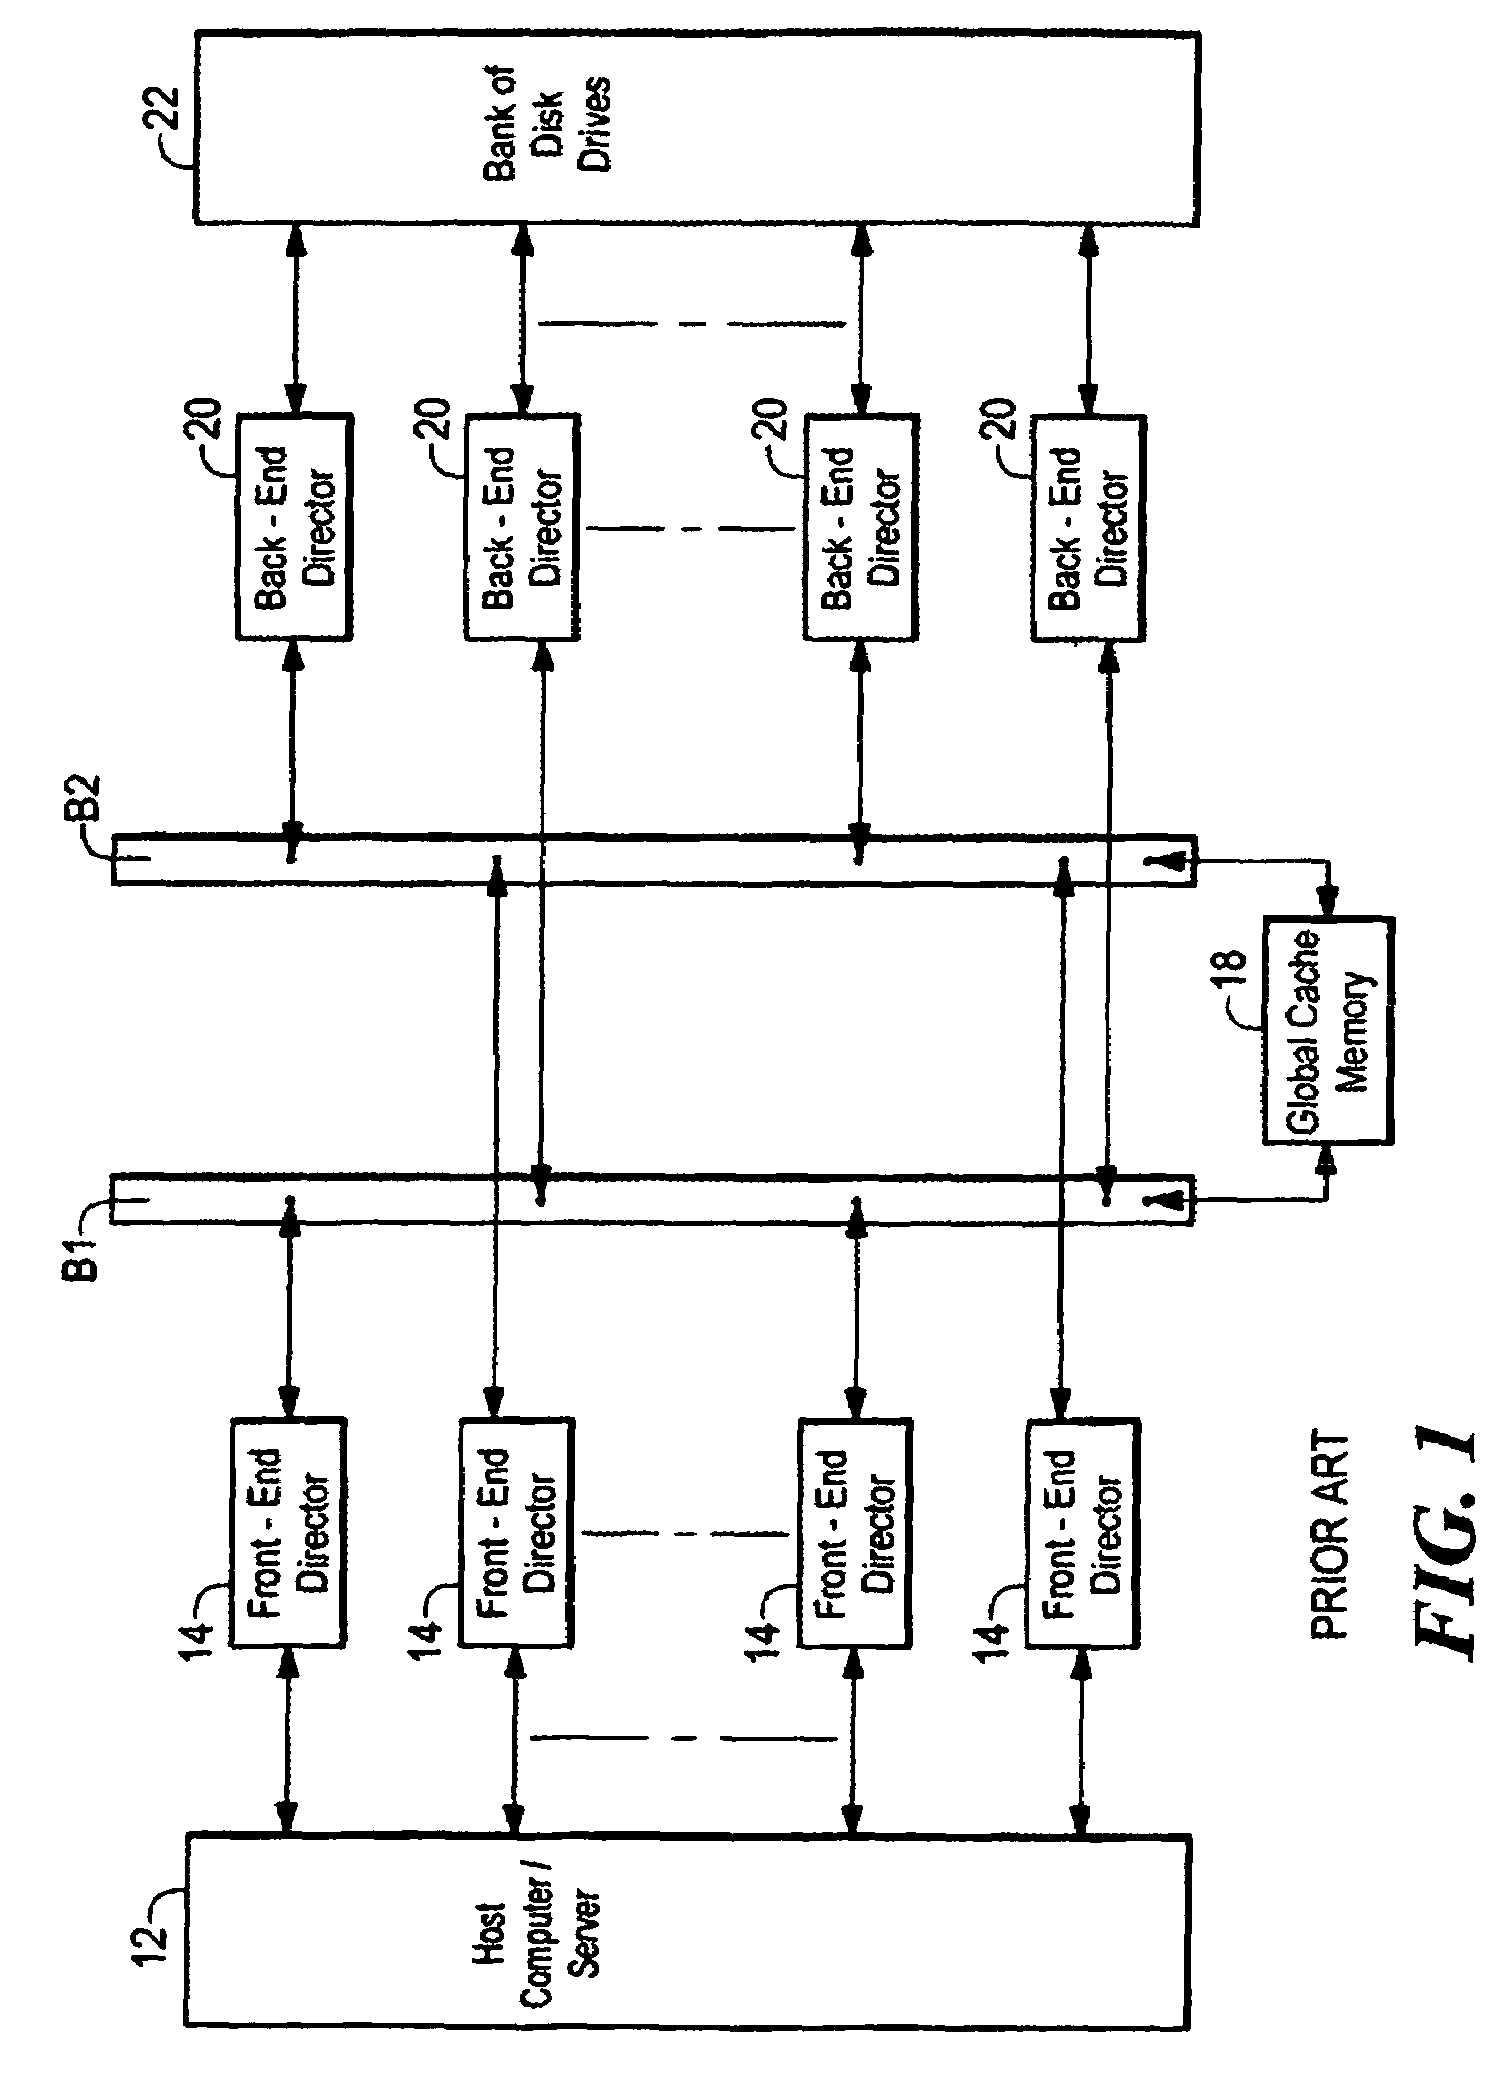 Data storage system having separate data transfer section and message network